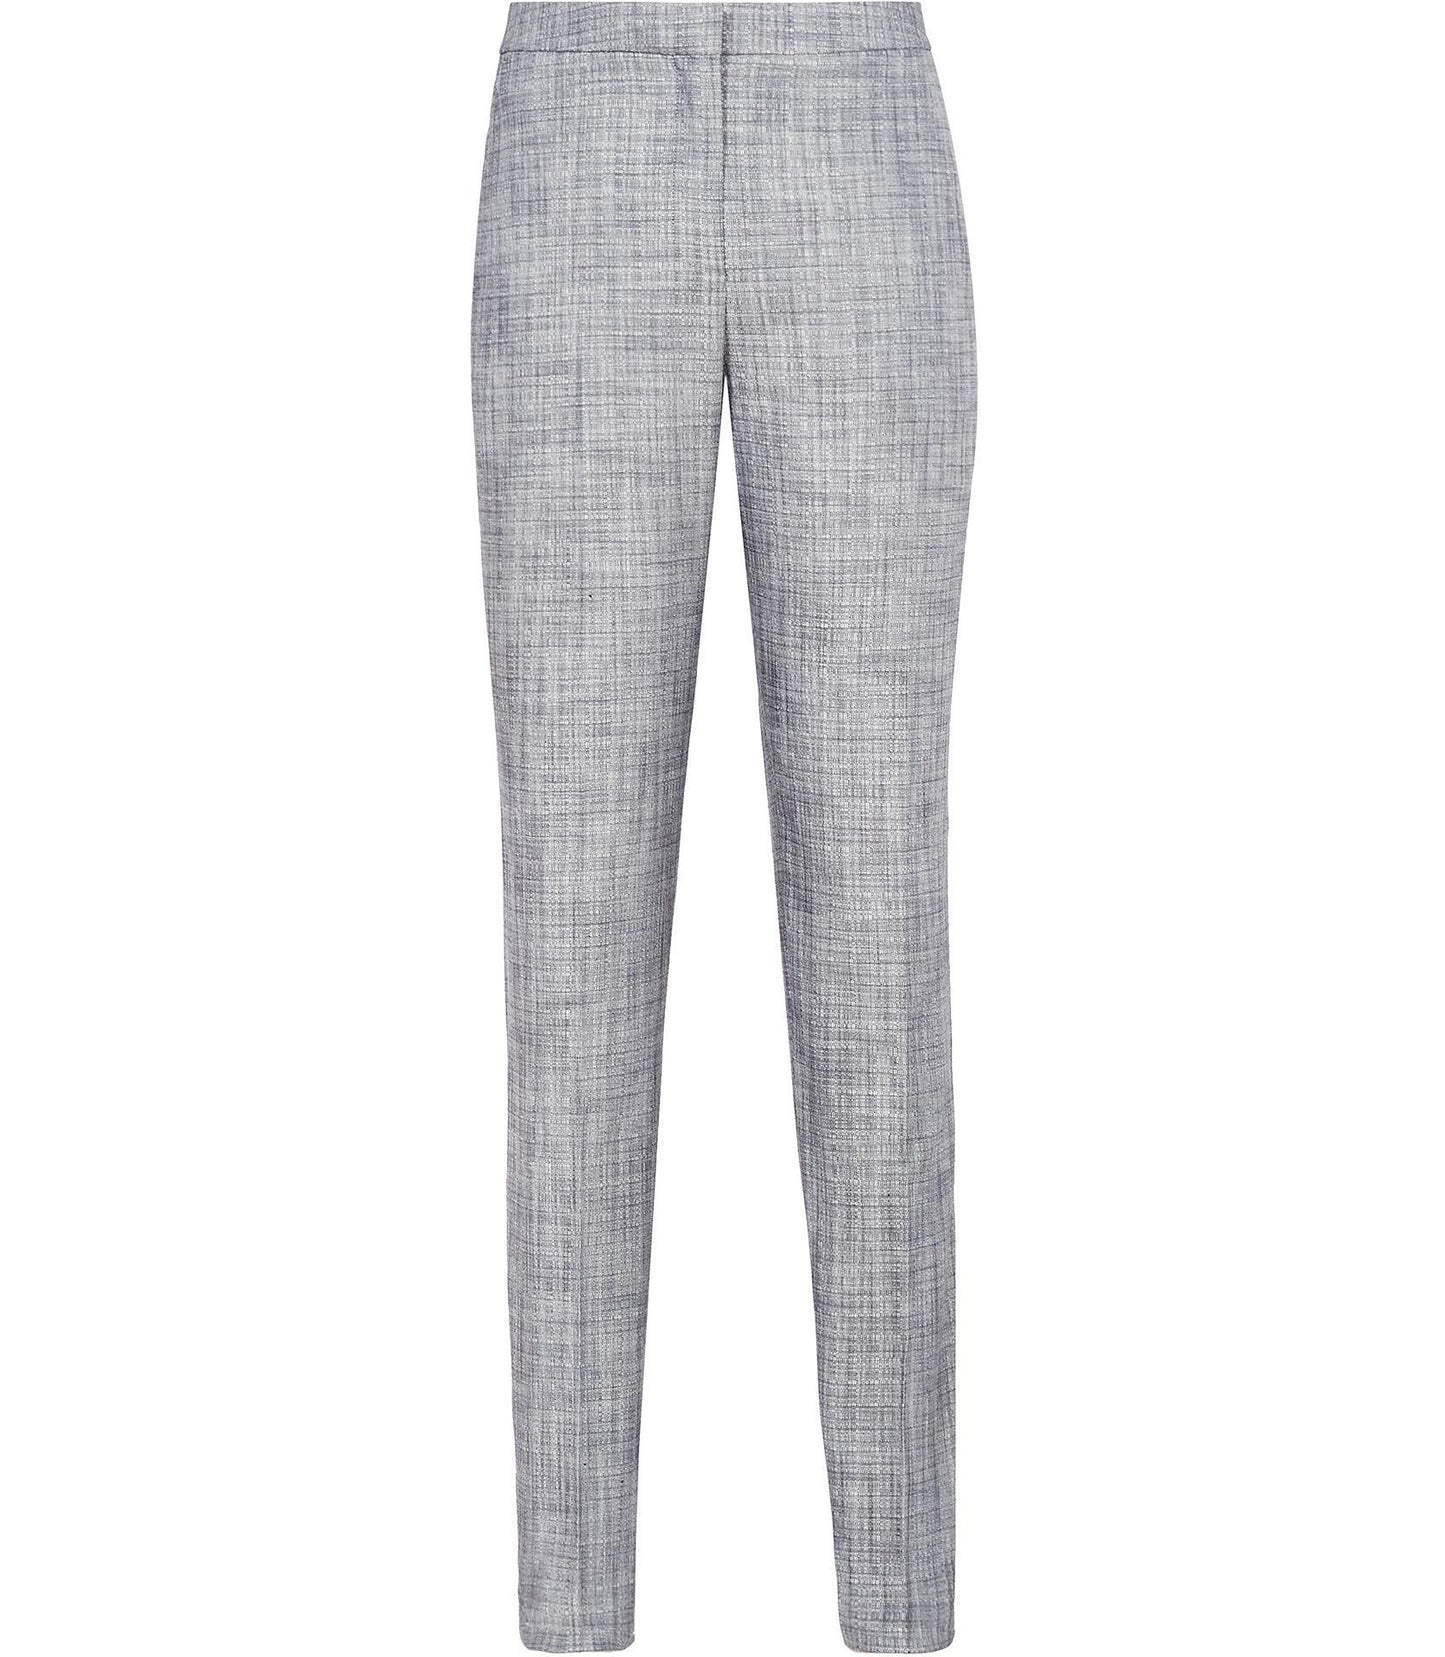 REISS Remi Tailored Trouser - size 8